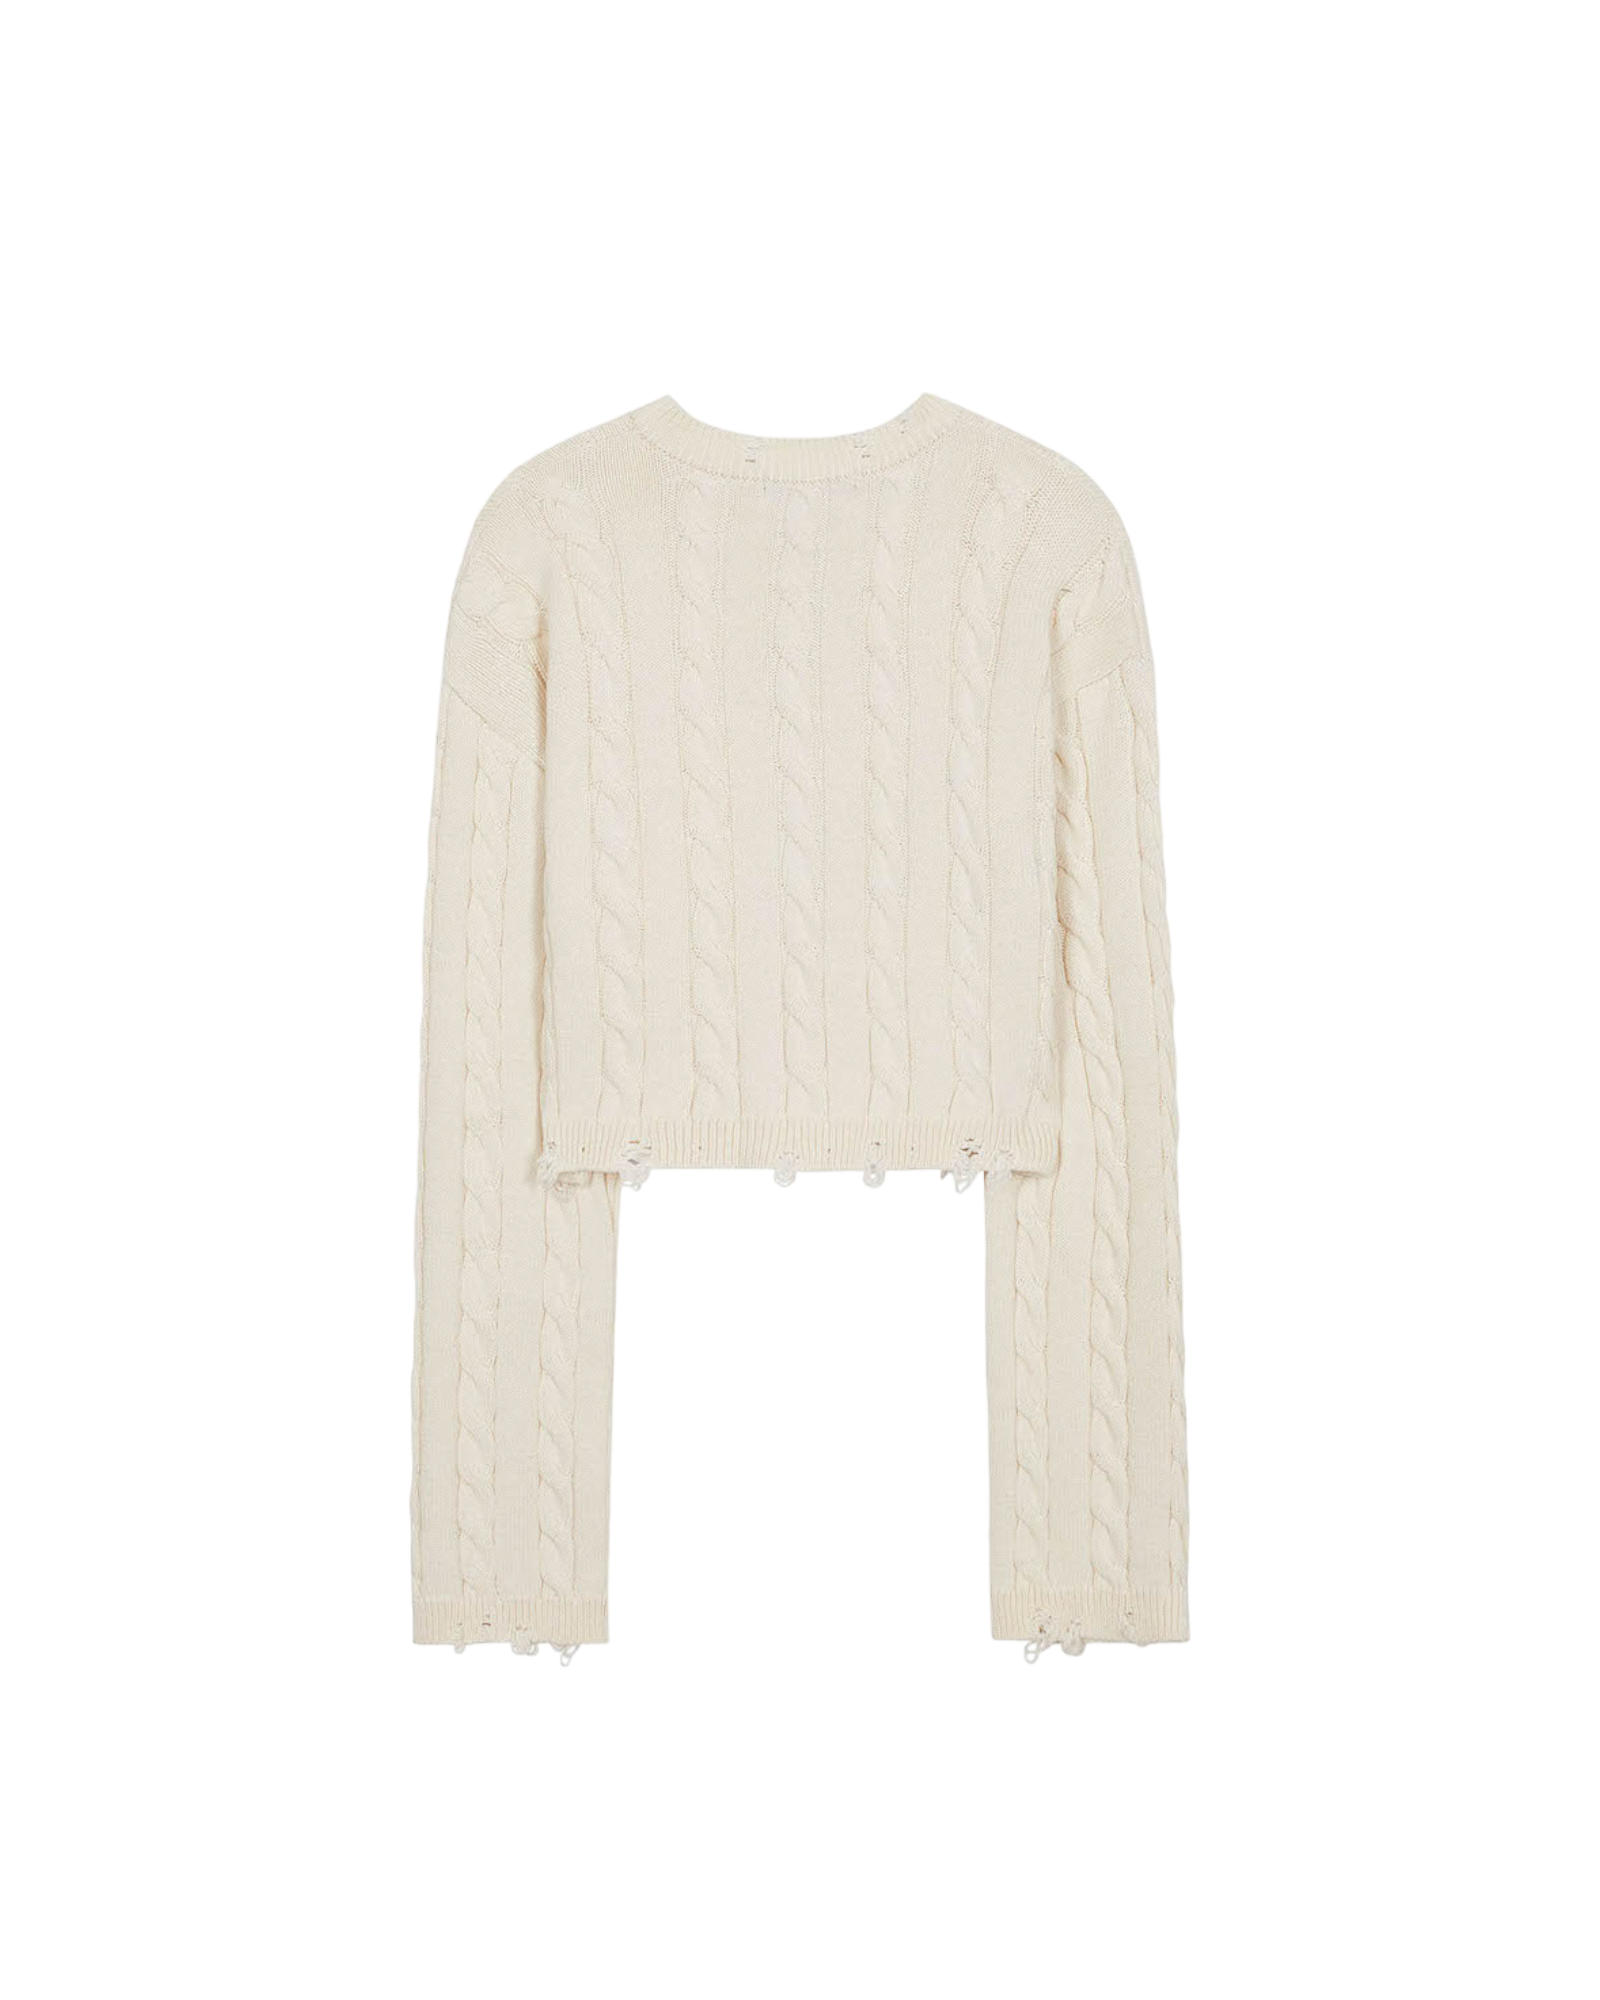 2 Way Zipper Cropped Knit Top In Ivory